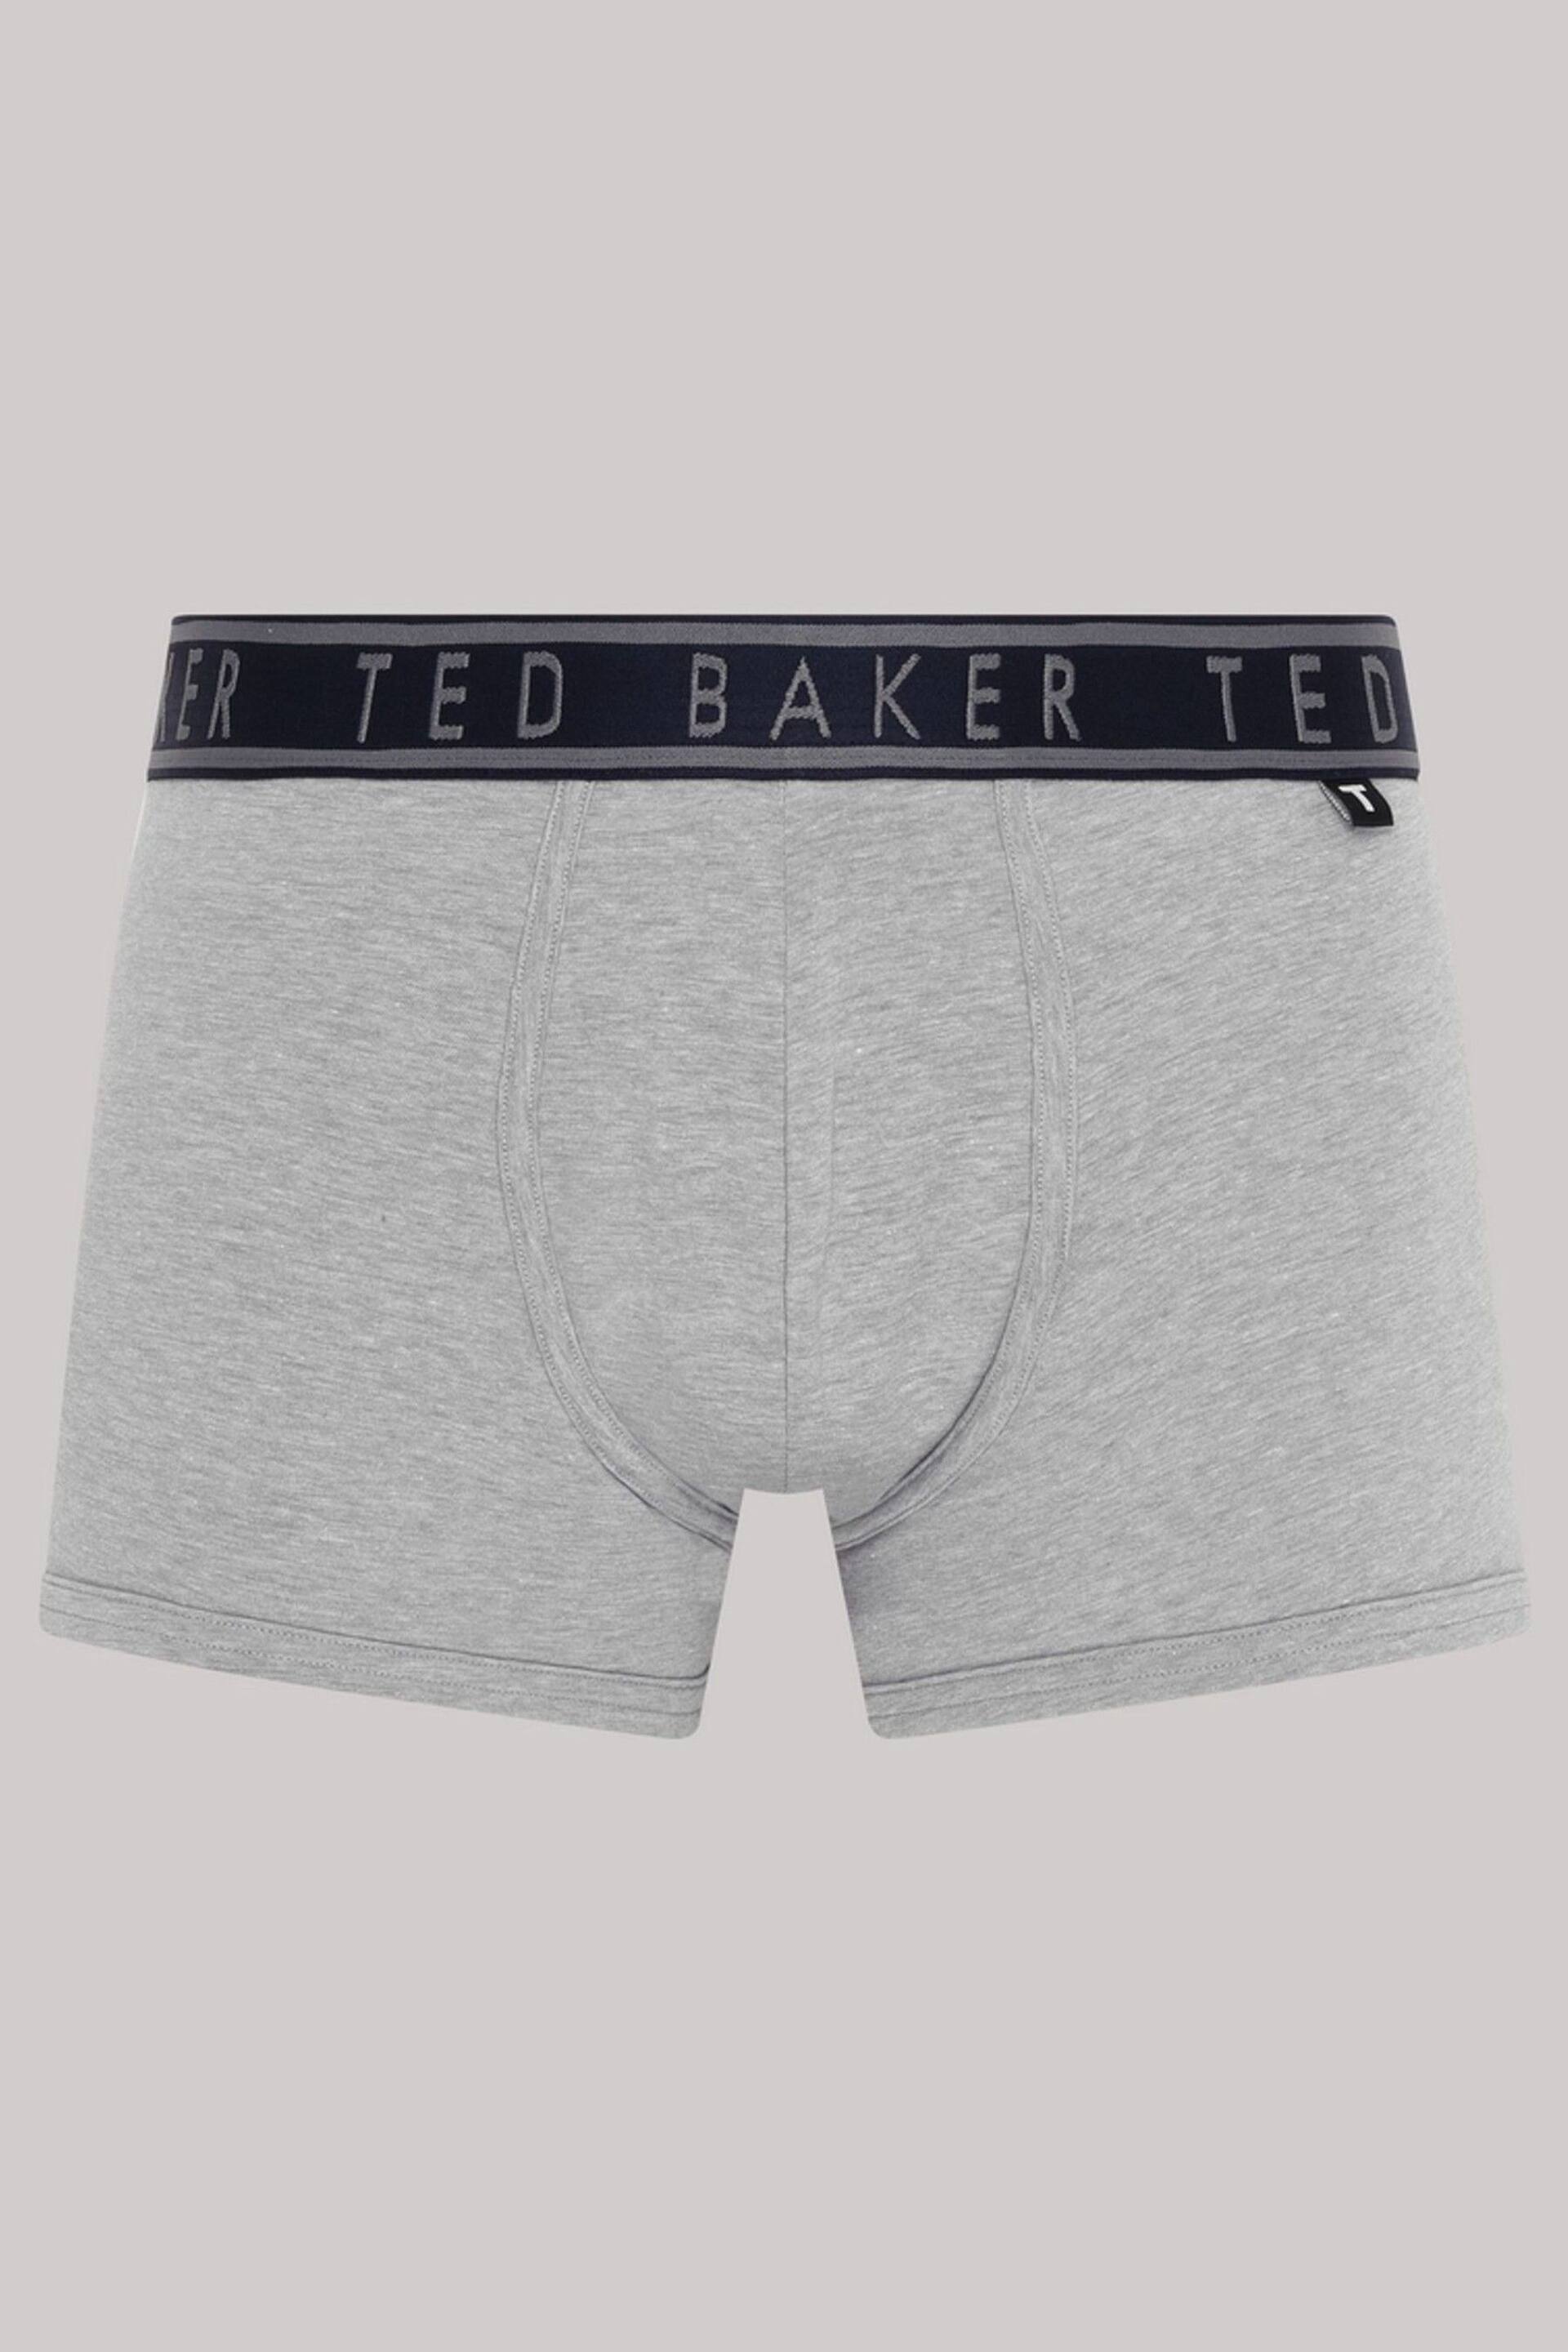 Ted Baker Blue Cotton Trunks 3 Pack - Image 2 of 6